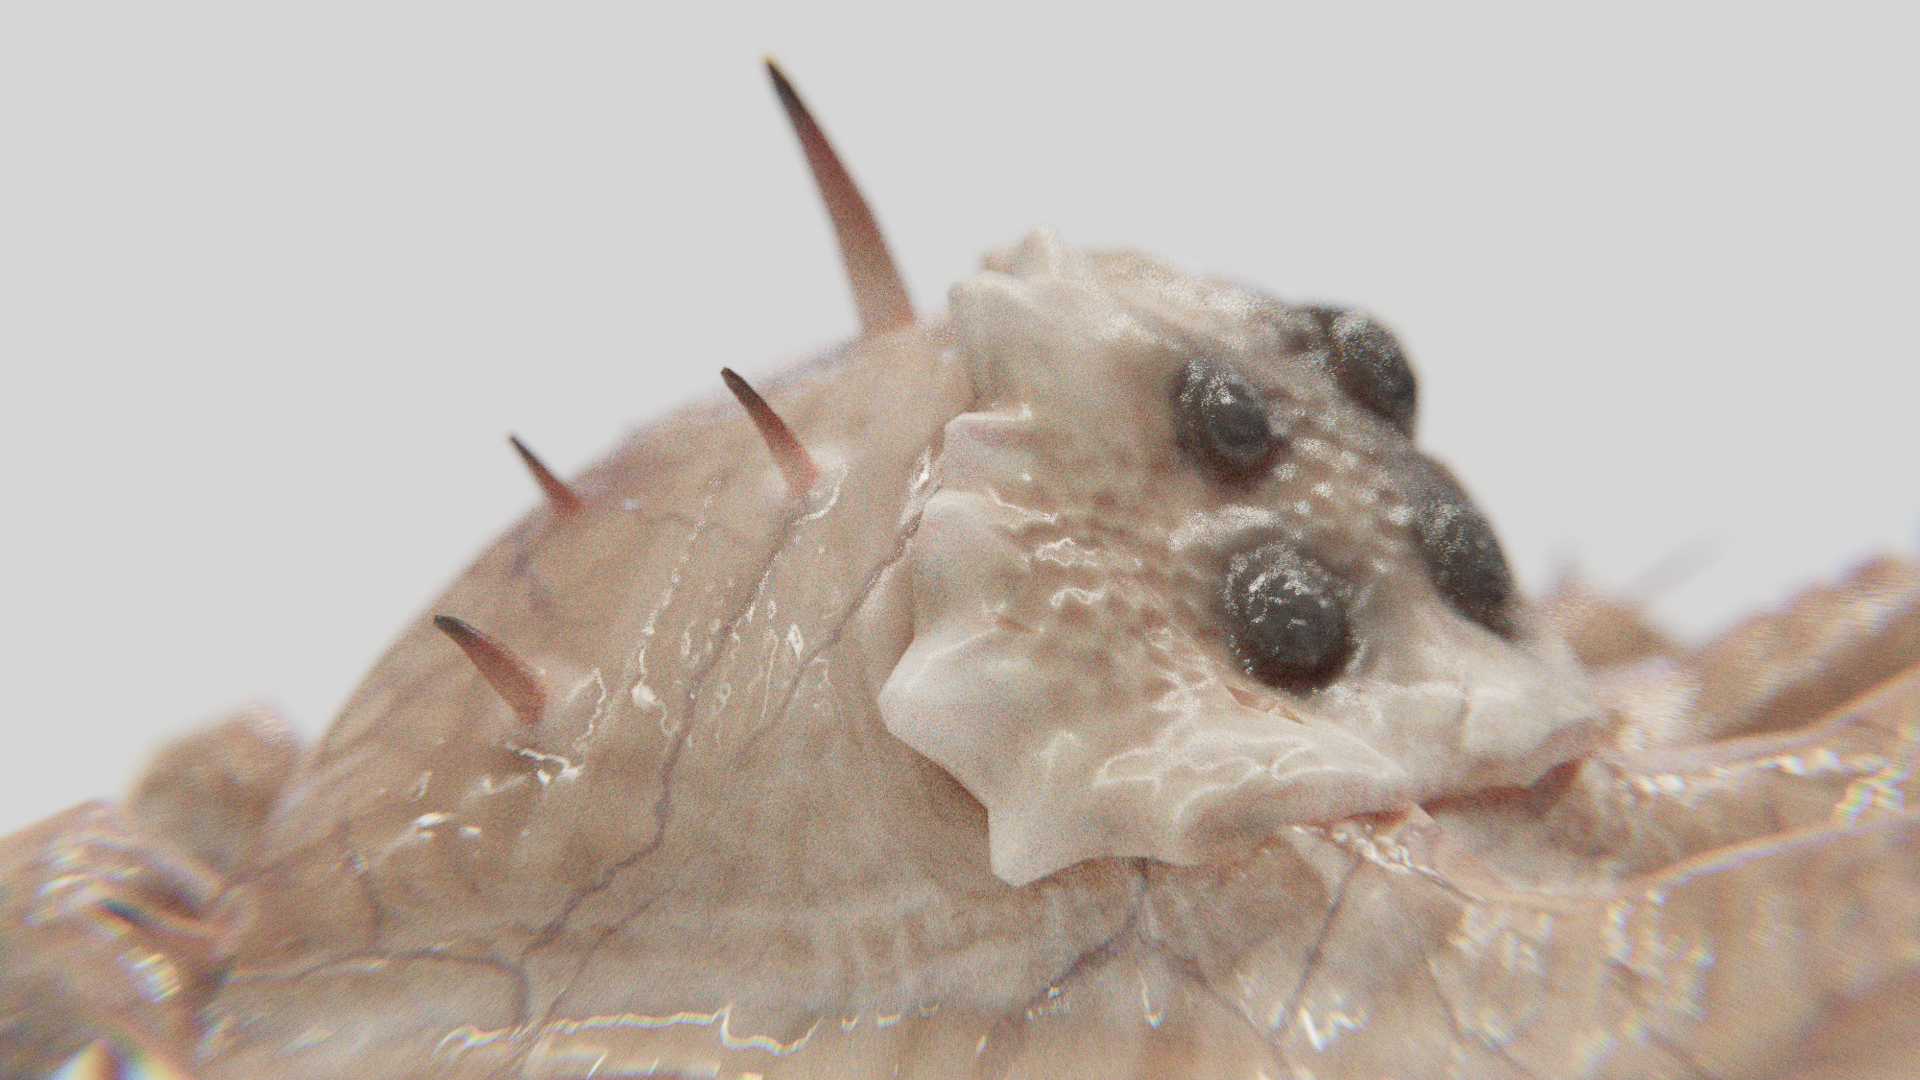 Kranion Soldier Close-up - 3d Model of Facehugger or Headcrab